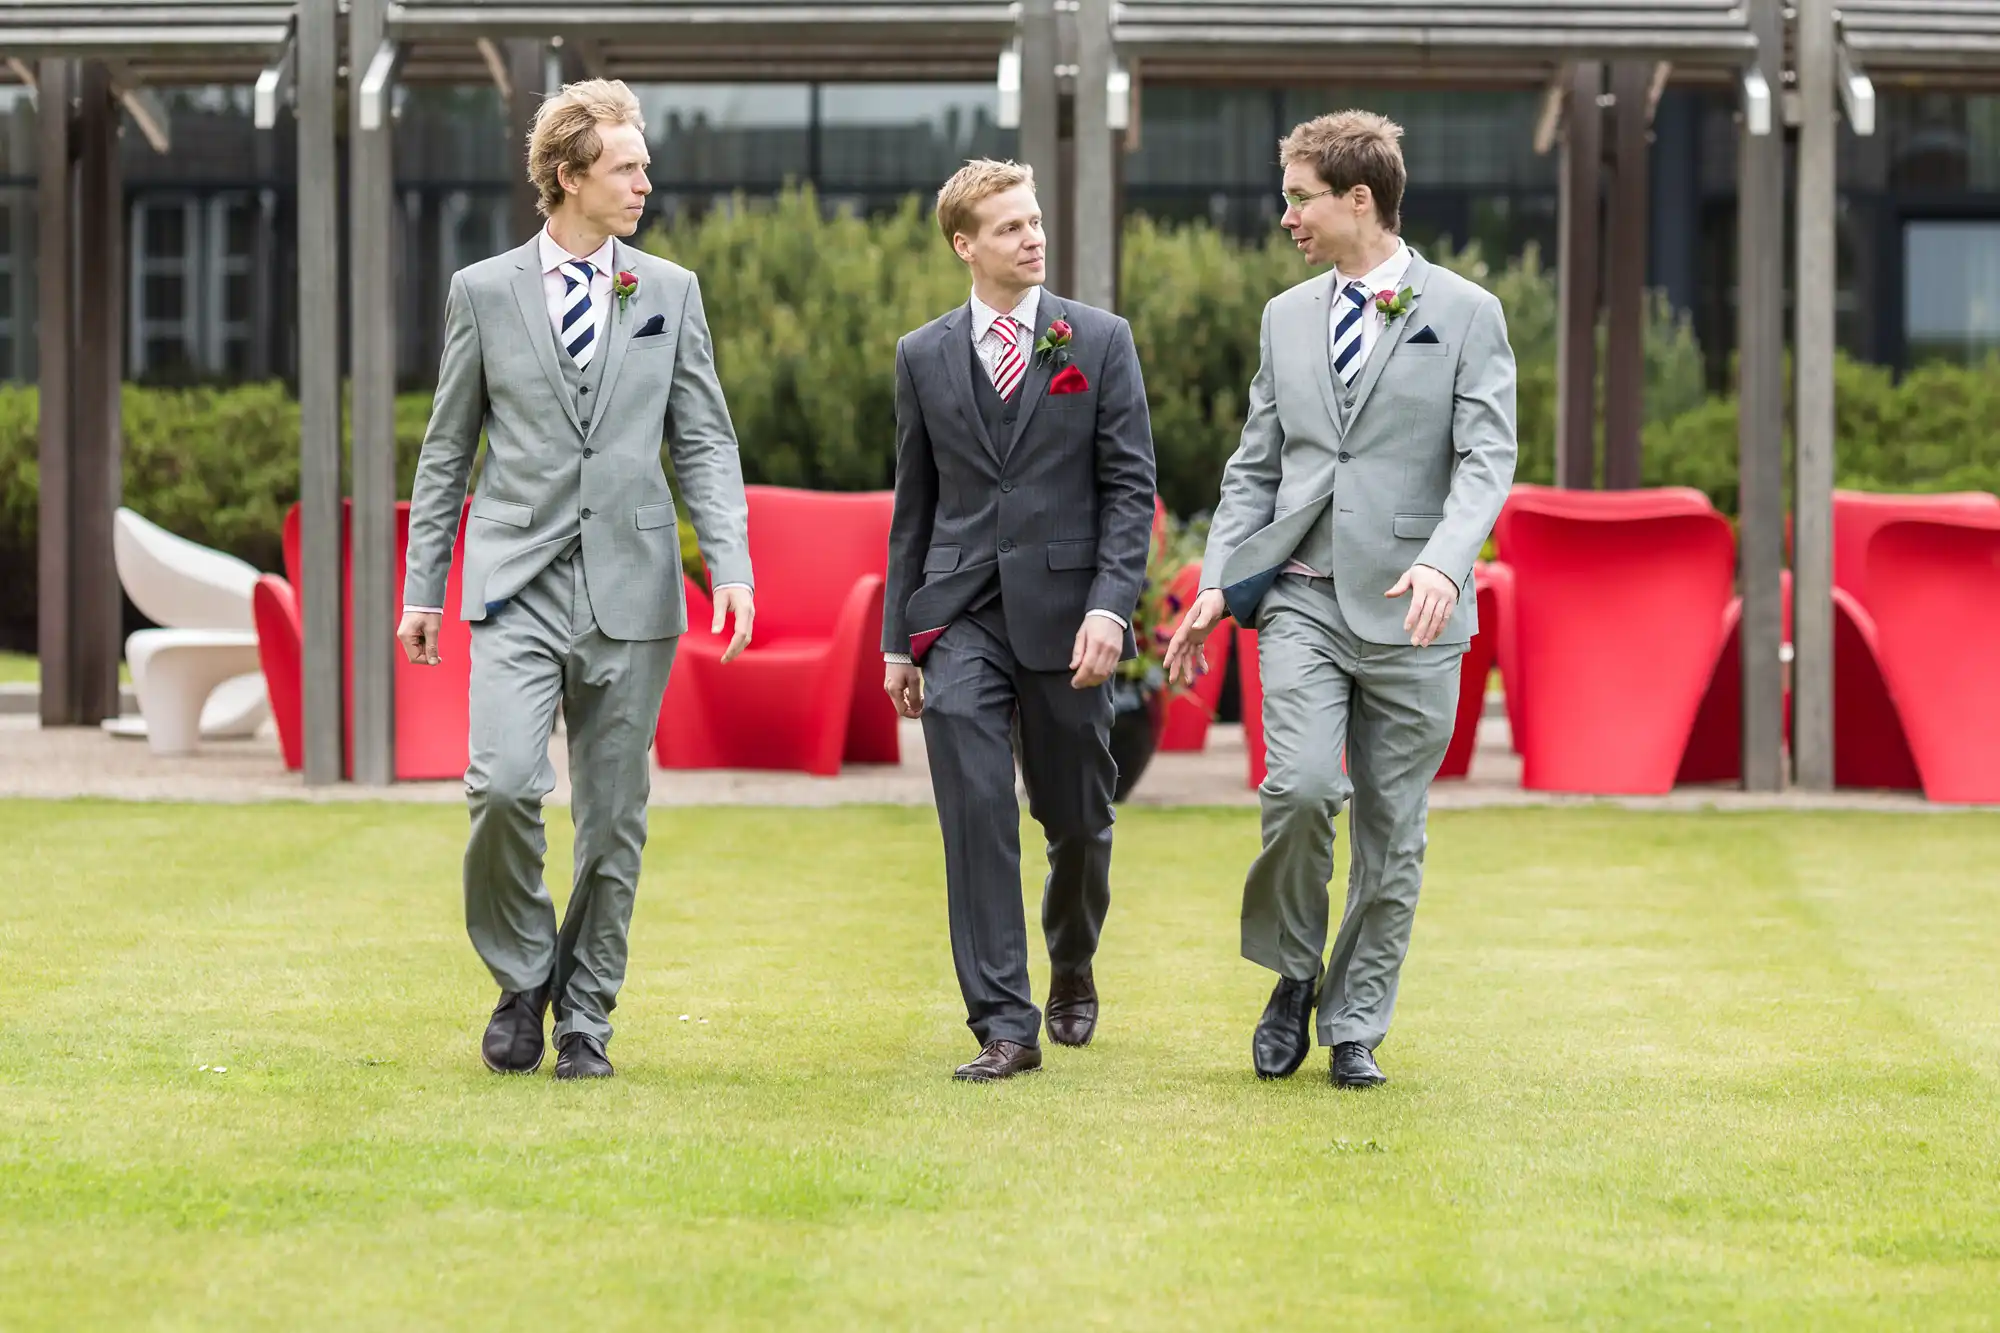 Three men in suits with boutonnieres walk and talk together across a grassy area with modern chairs in the background.